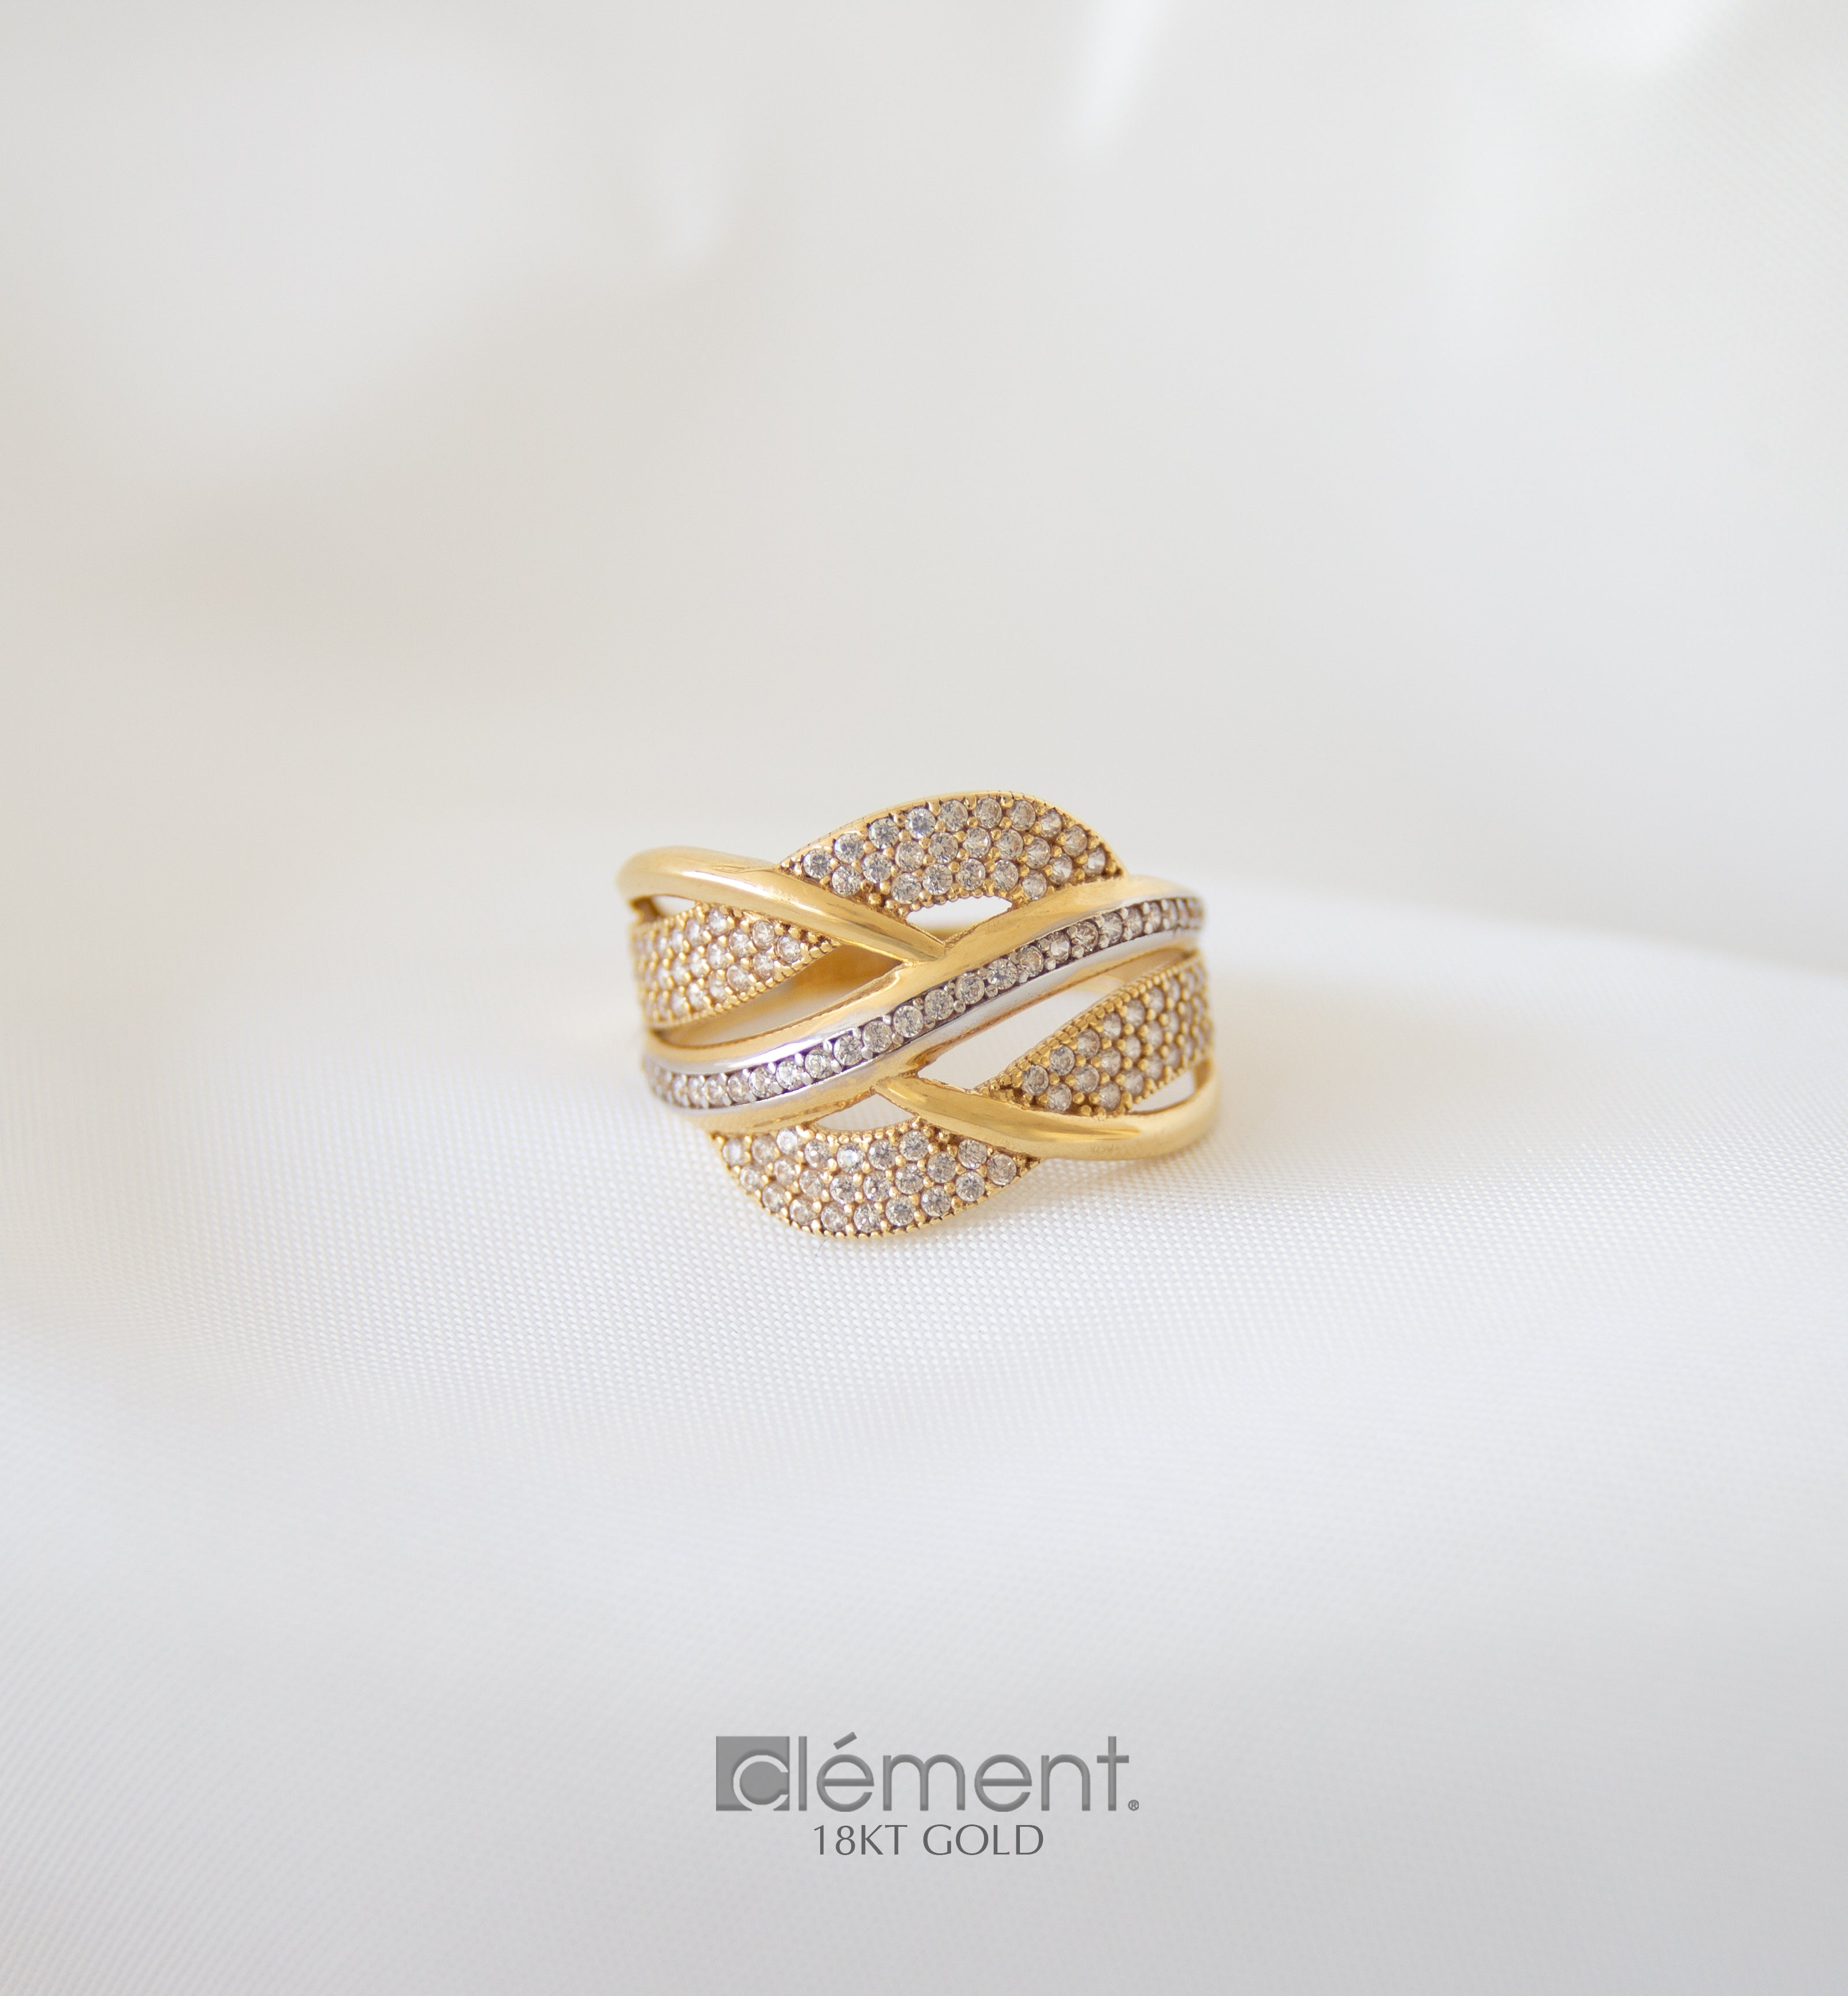 18ct Gold Two-Tone Ring with Cubic Zircon Stones